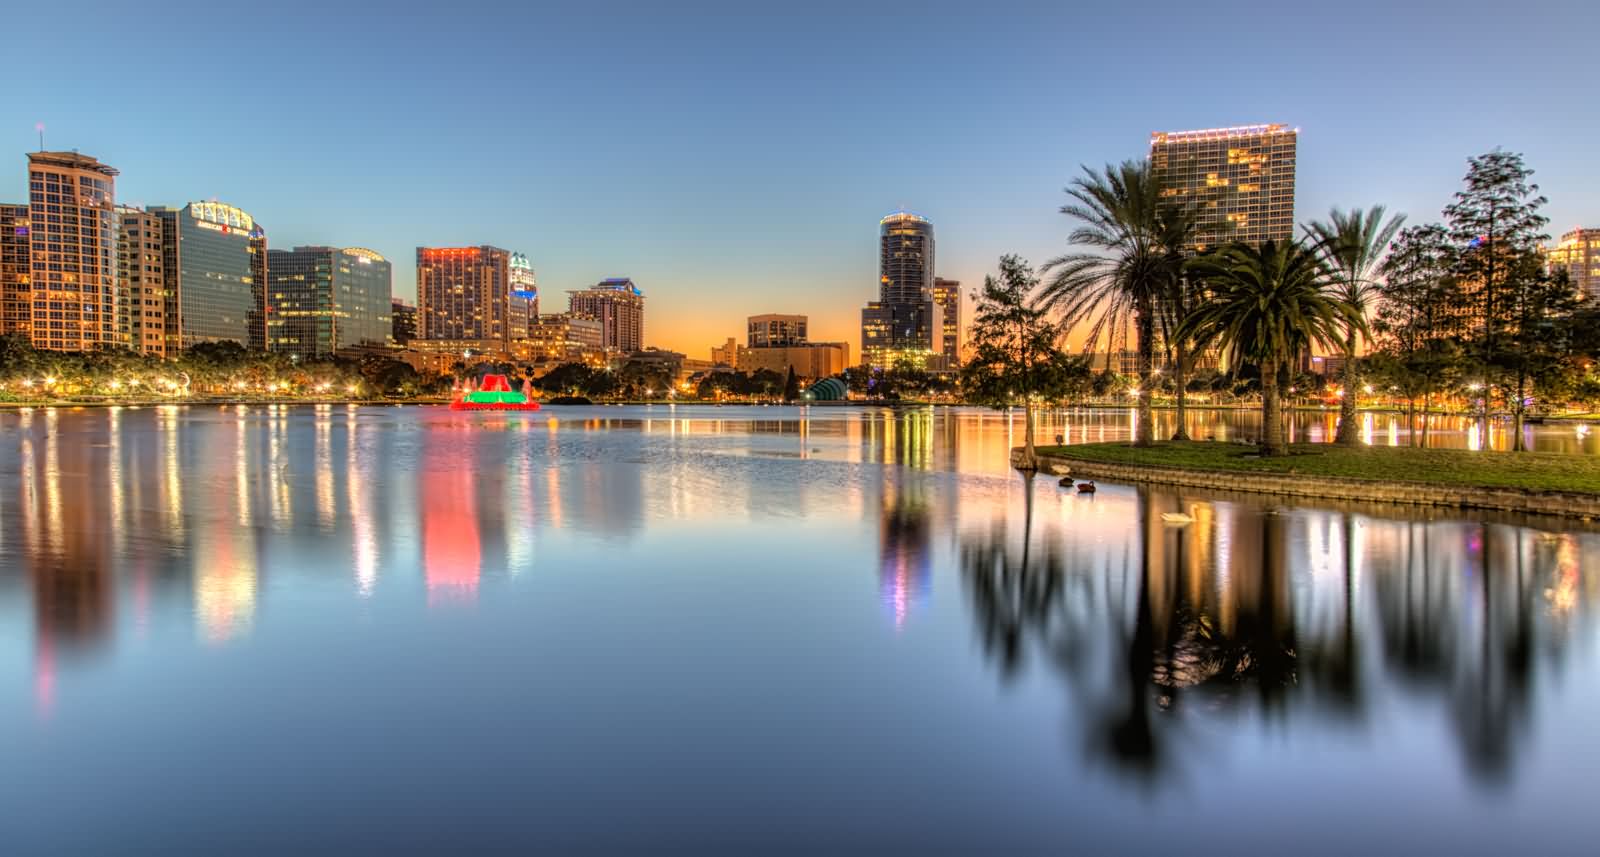 Lake Eola Classic View Just Before Sunset